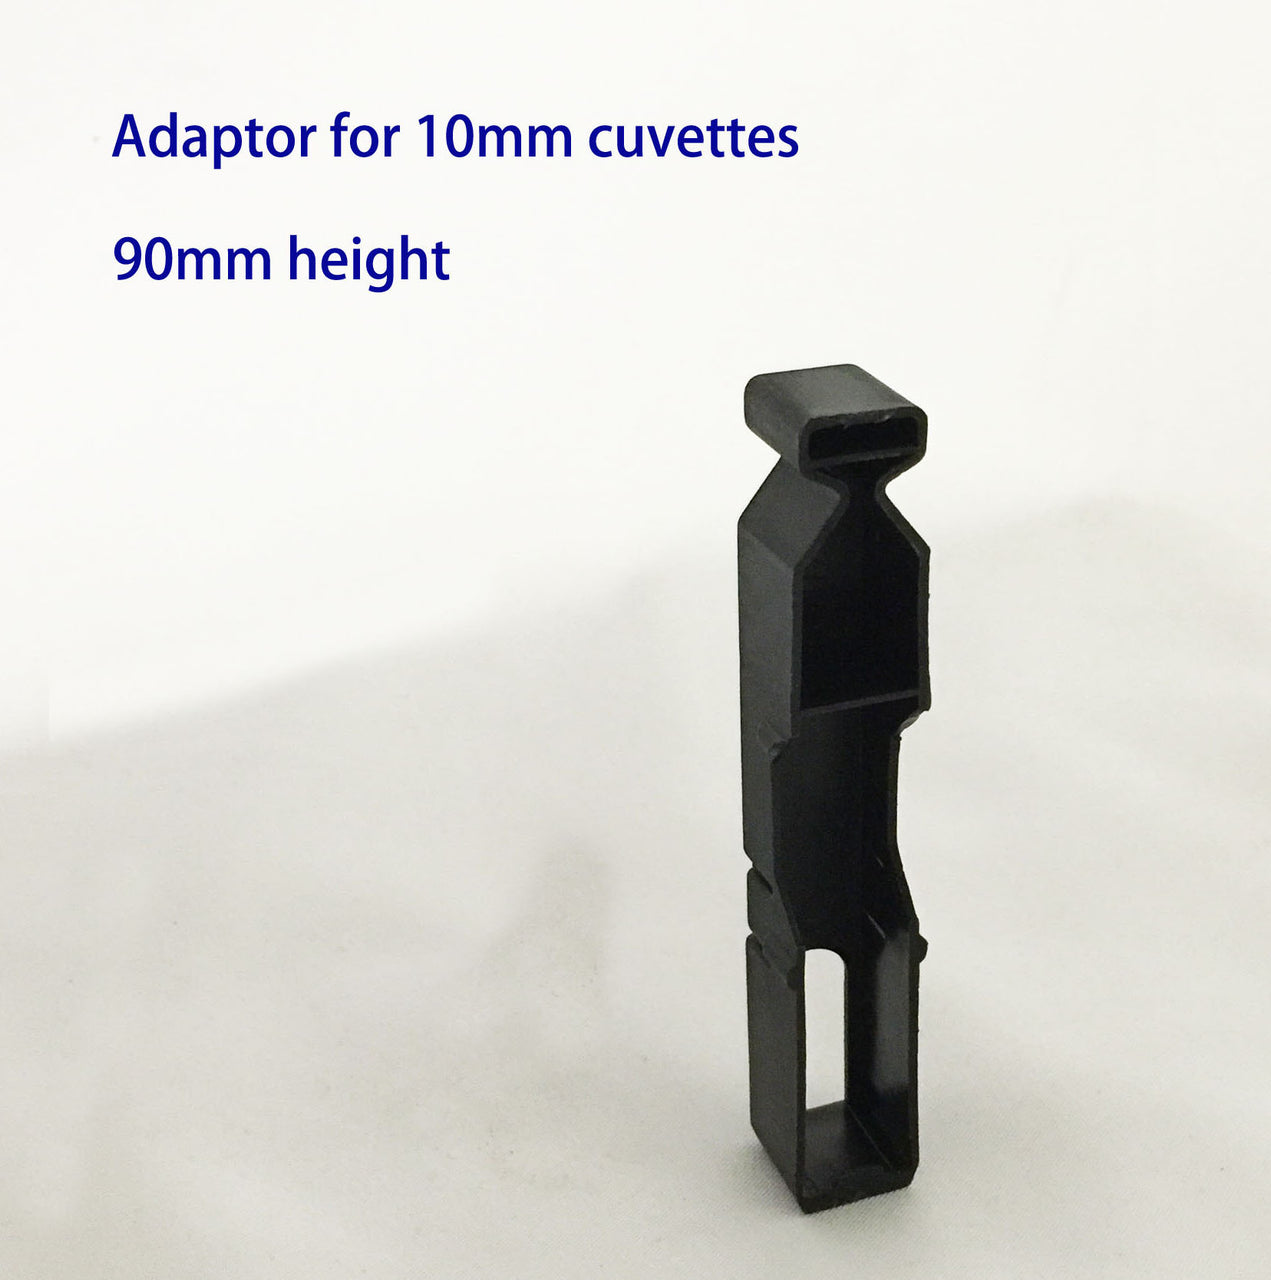 Adaptor for 100mm square cuvettes - 90mm height